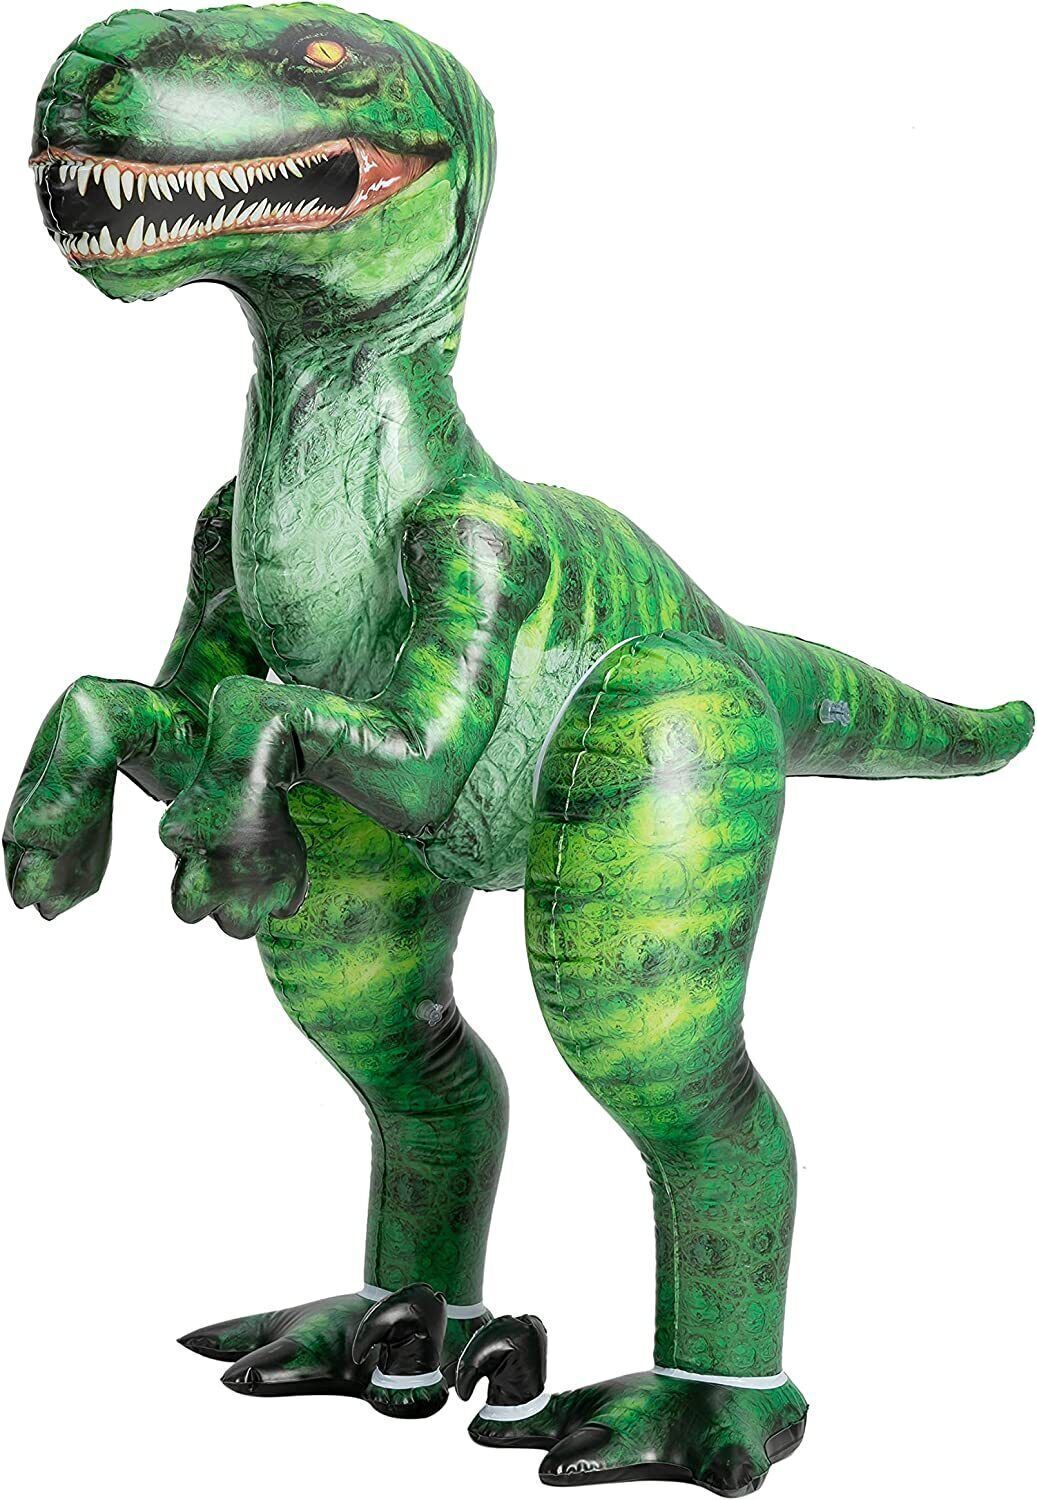 60" Inflatable Giant Dinosaur Toy - Perfect Kids' Party Decor!